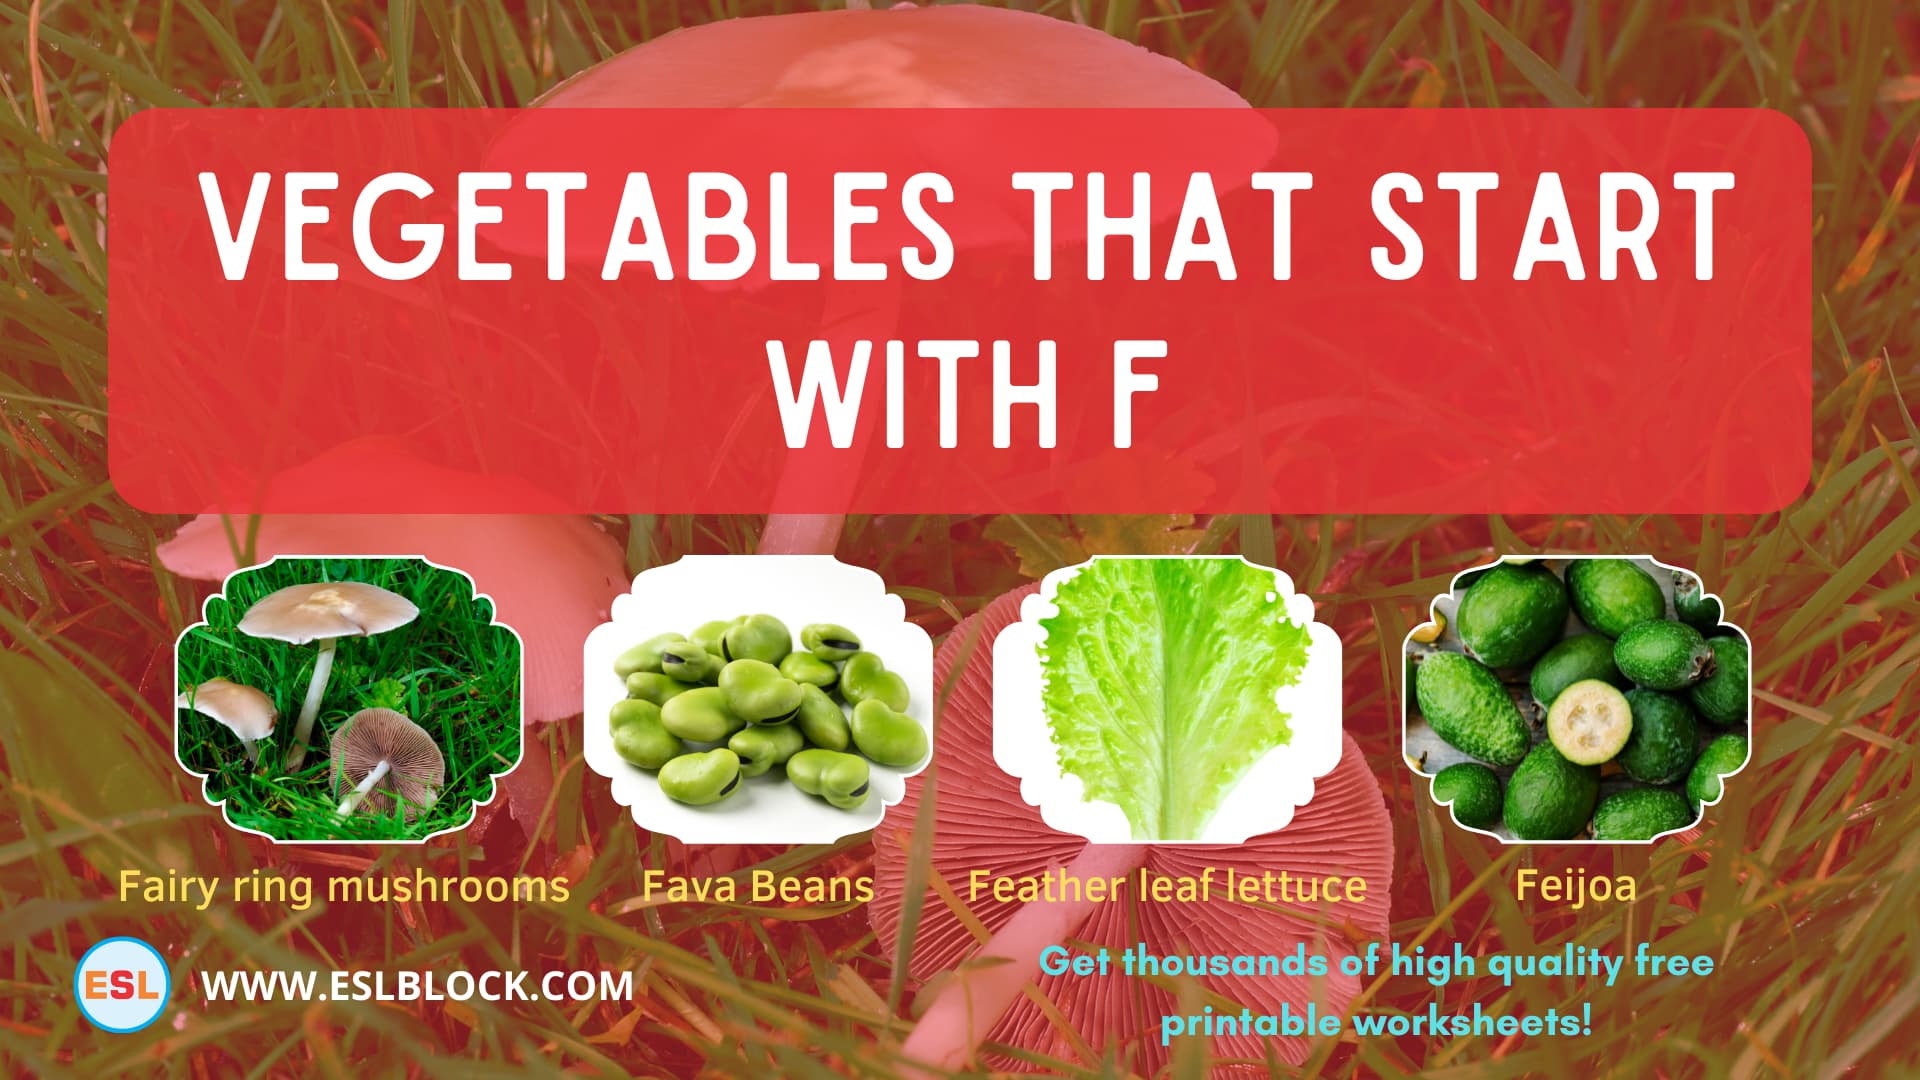 5 Letter Vegetables Starting With F, English, English Nouns, English Vocabulary, English Words, F Vegetables, F Vegetables in English, F Vegetables Names, List of Vegetables That Start With F, Nouns, Vegetables List, Vegetables Names, Vegetables That Begins With F, Vegetables That Start With F, Vocabulary